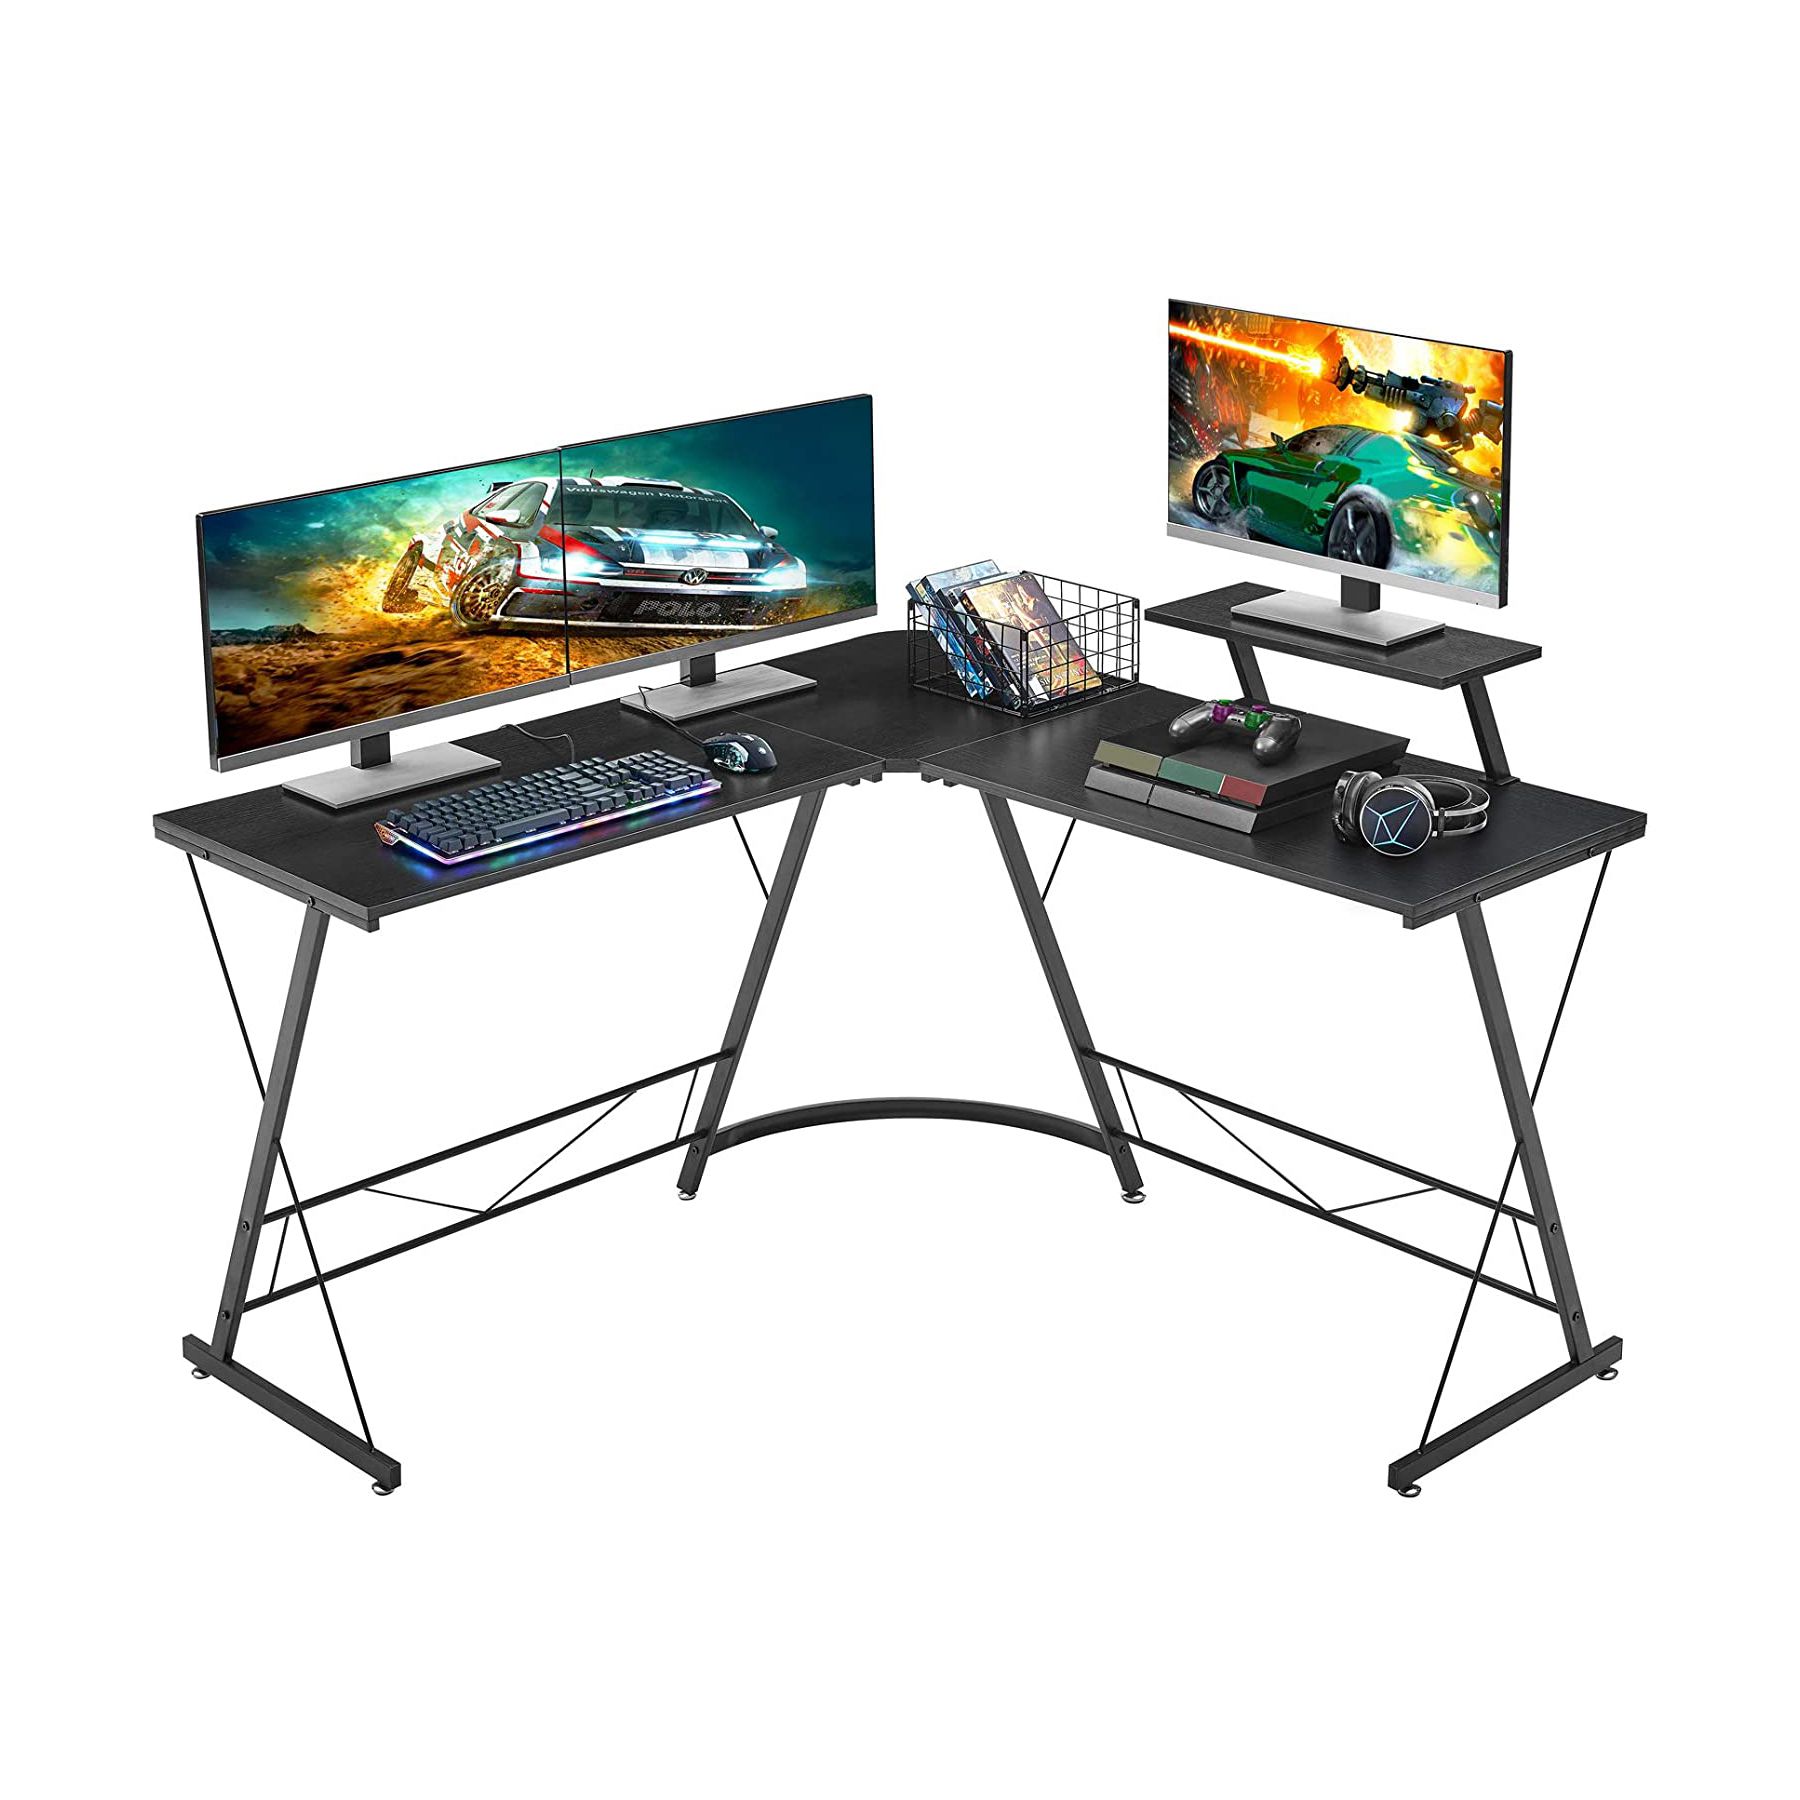 Mr IRONSTONE 50_8-inch L-Shaped Gaming Desk 01